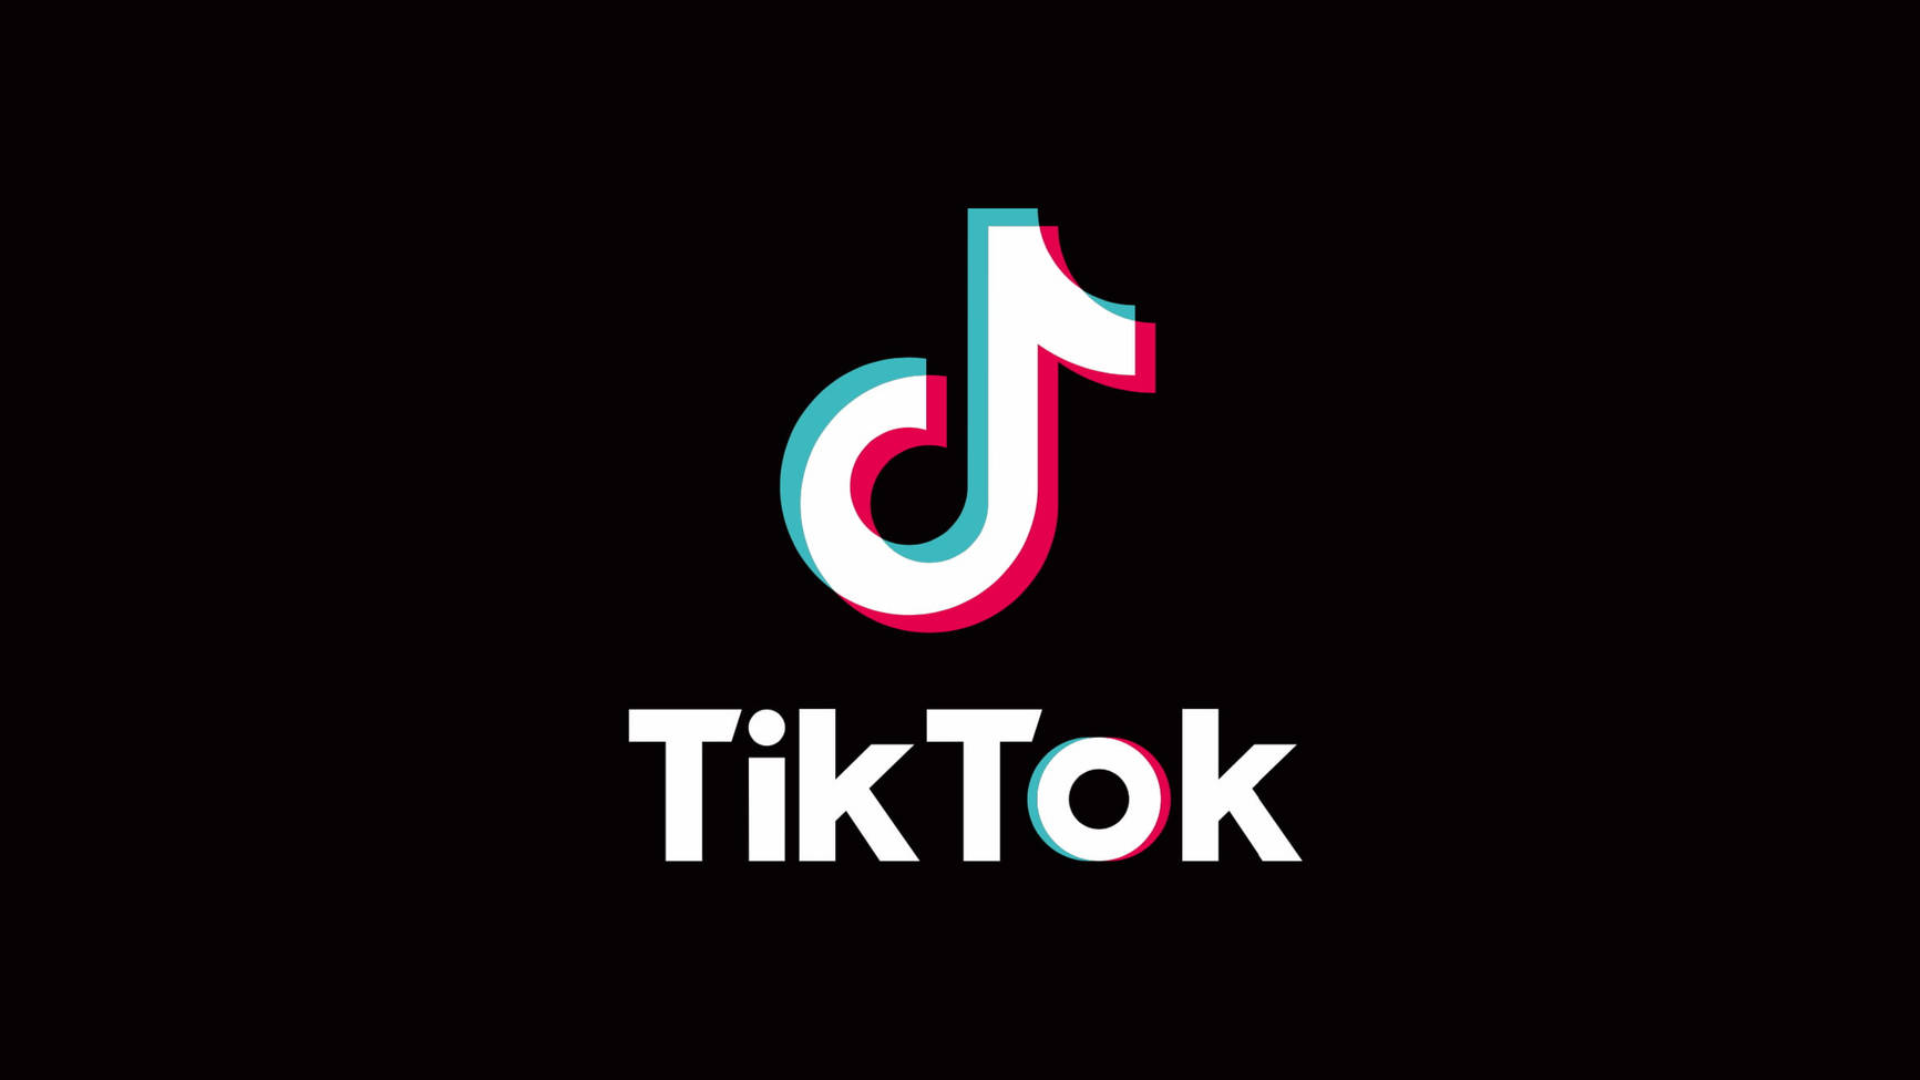 tiktok ban bill signed into law by the biden administration